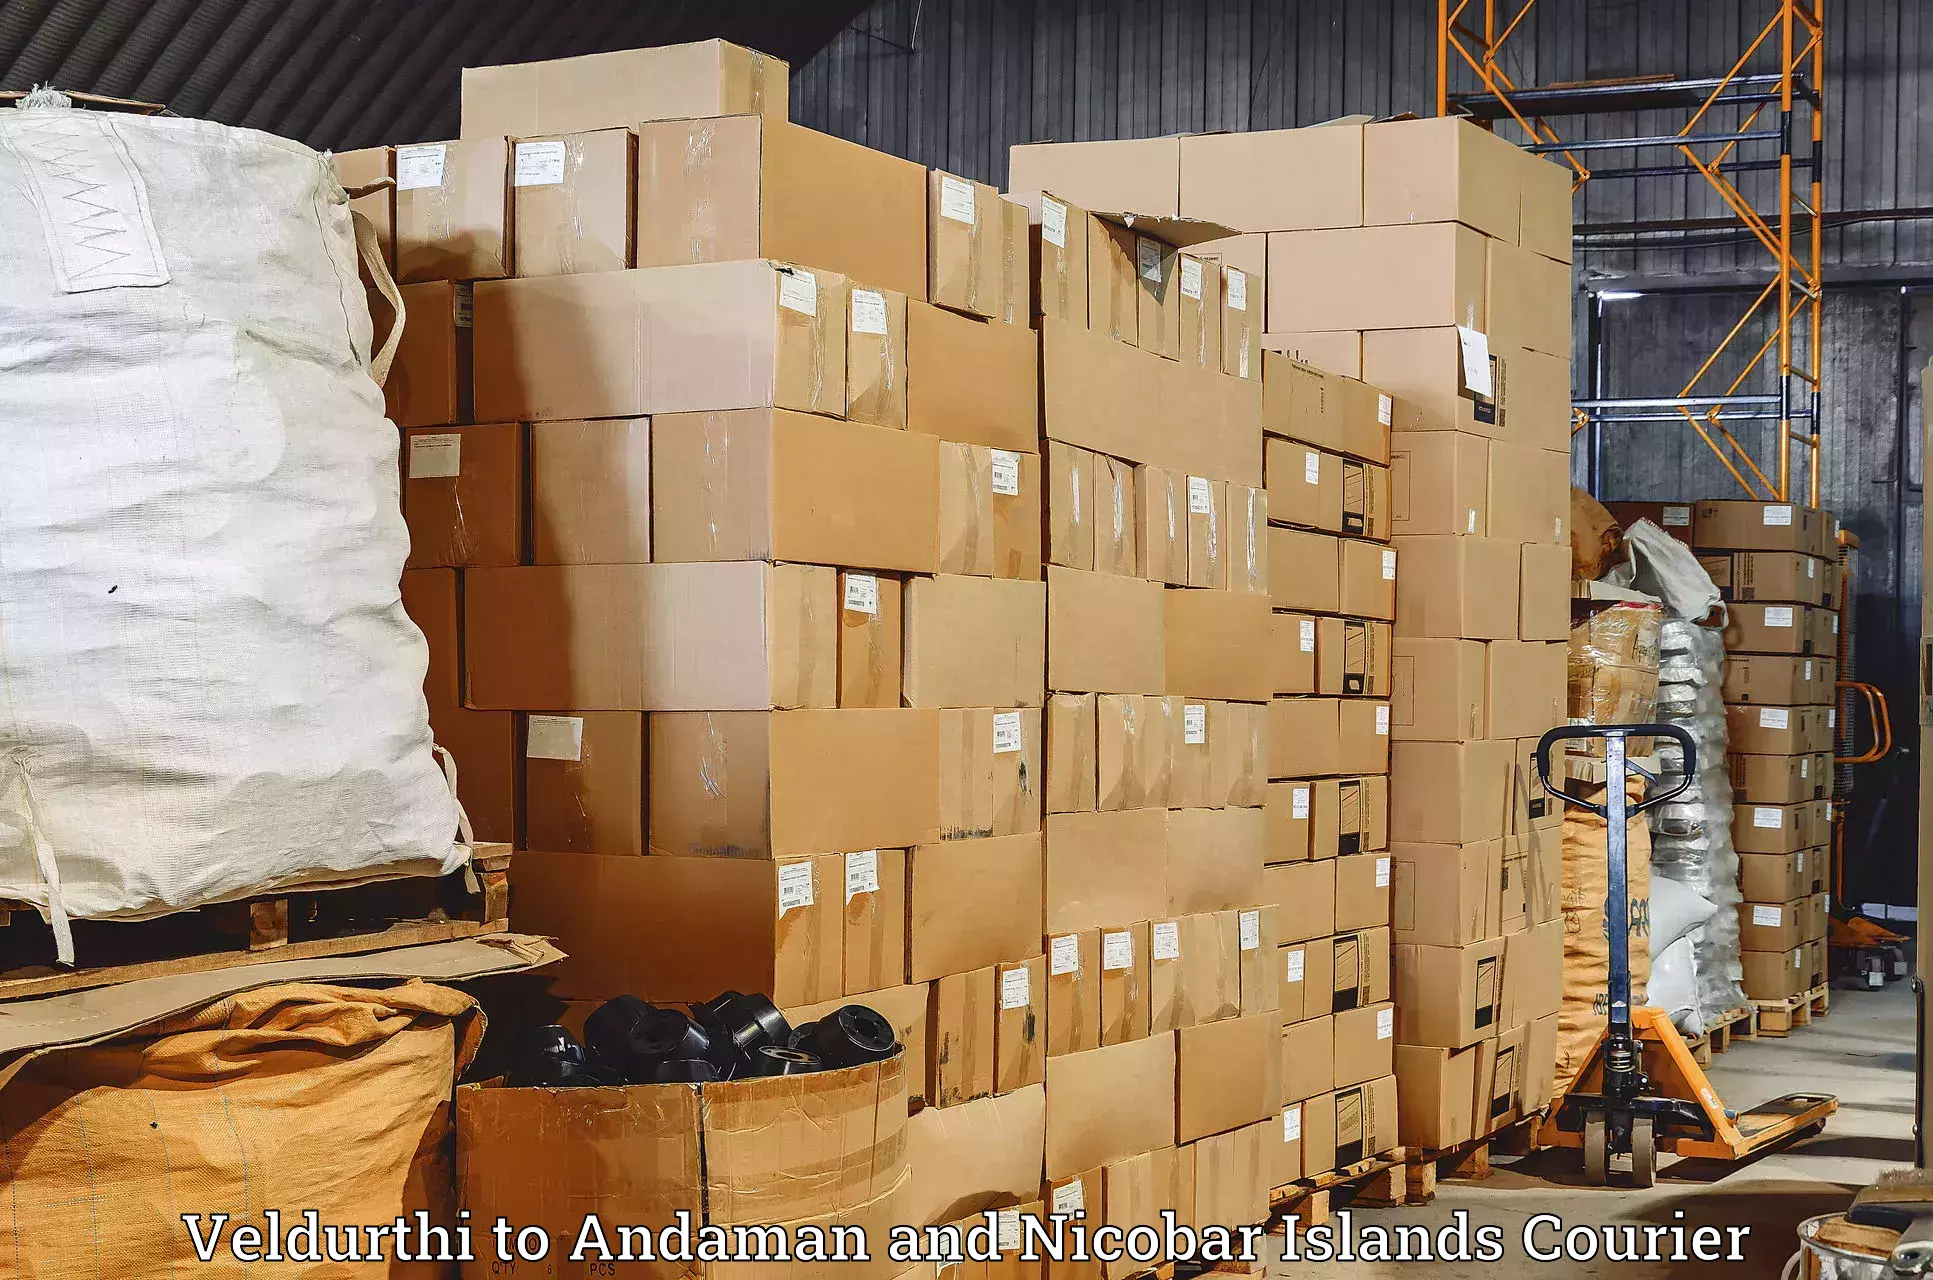 Reliable shipping partners in Veldurthi to Andaman and Nicobar Islands